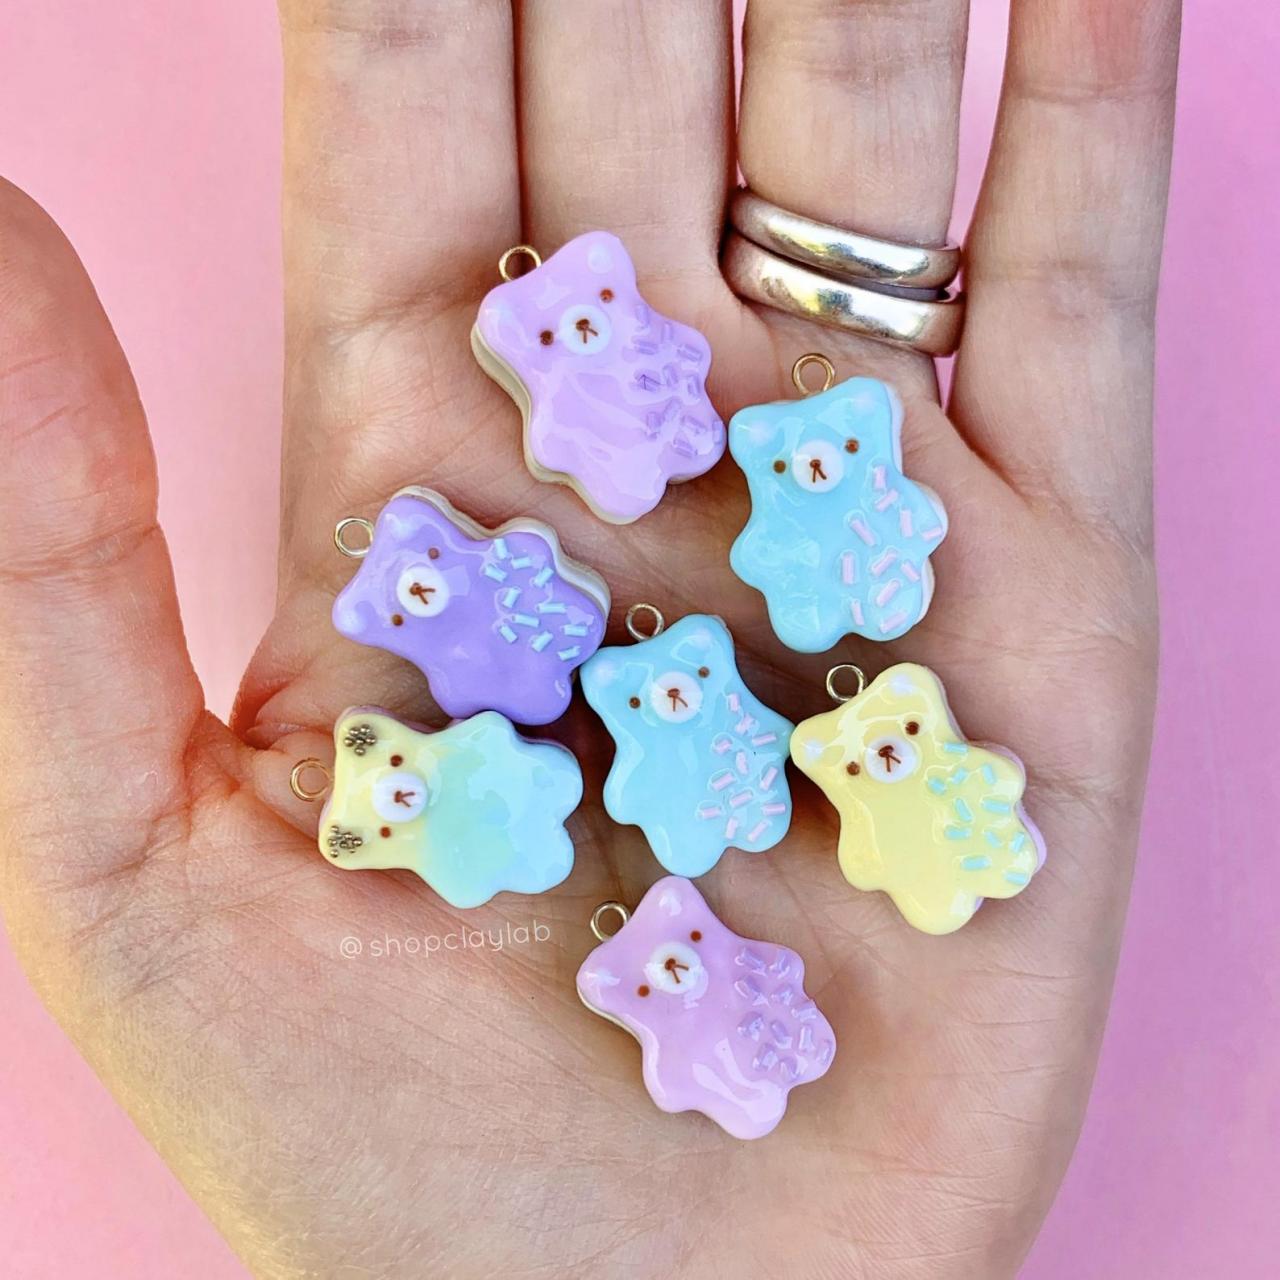 Kawaii Bear Cookies Pendant Polymer Clay Charms| Cute Pink Bear Biscuit Jewellery| Fake Food Accessory| Crochet Progress Keepers